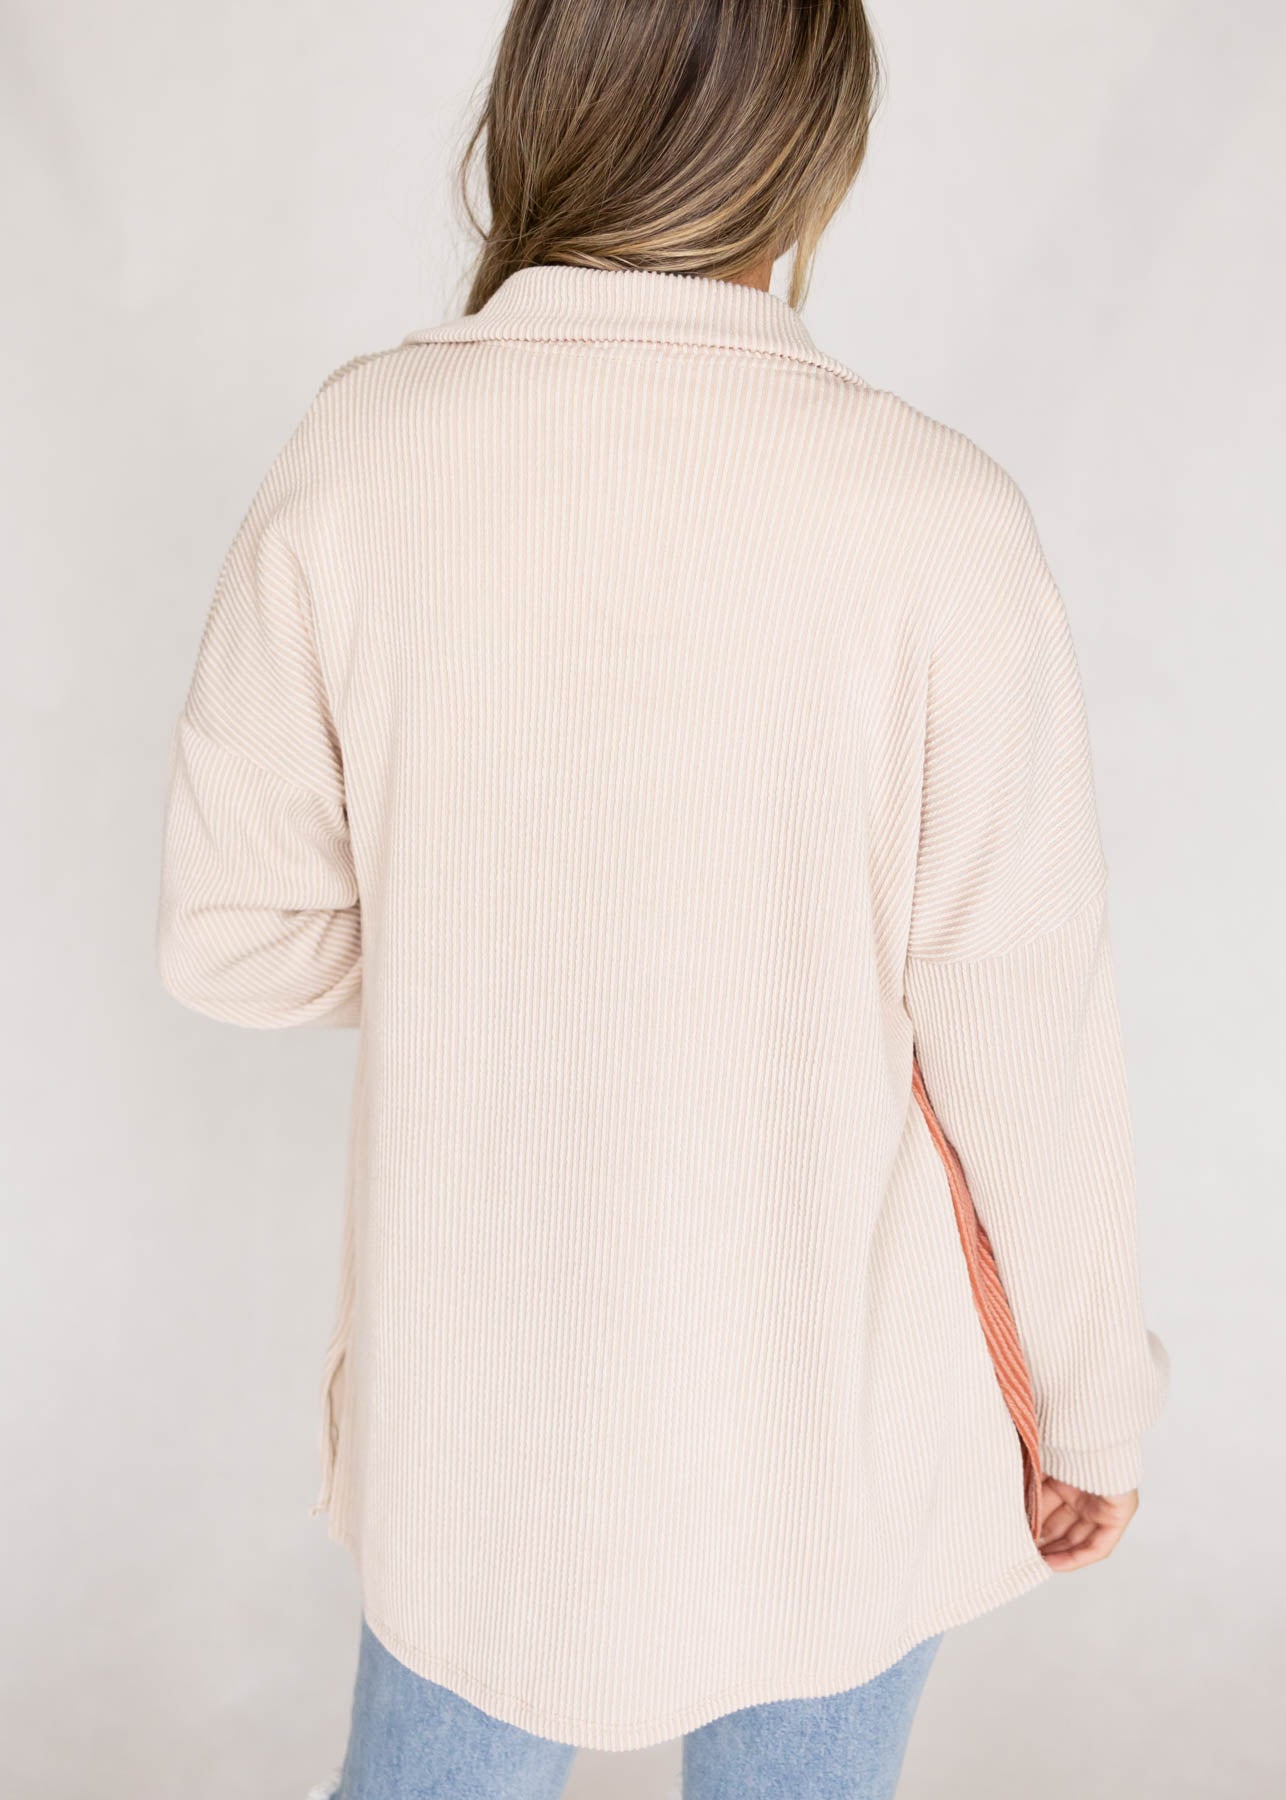 Back view of a cream shacket